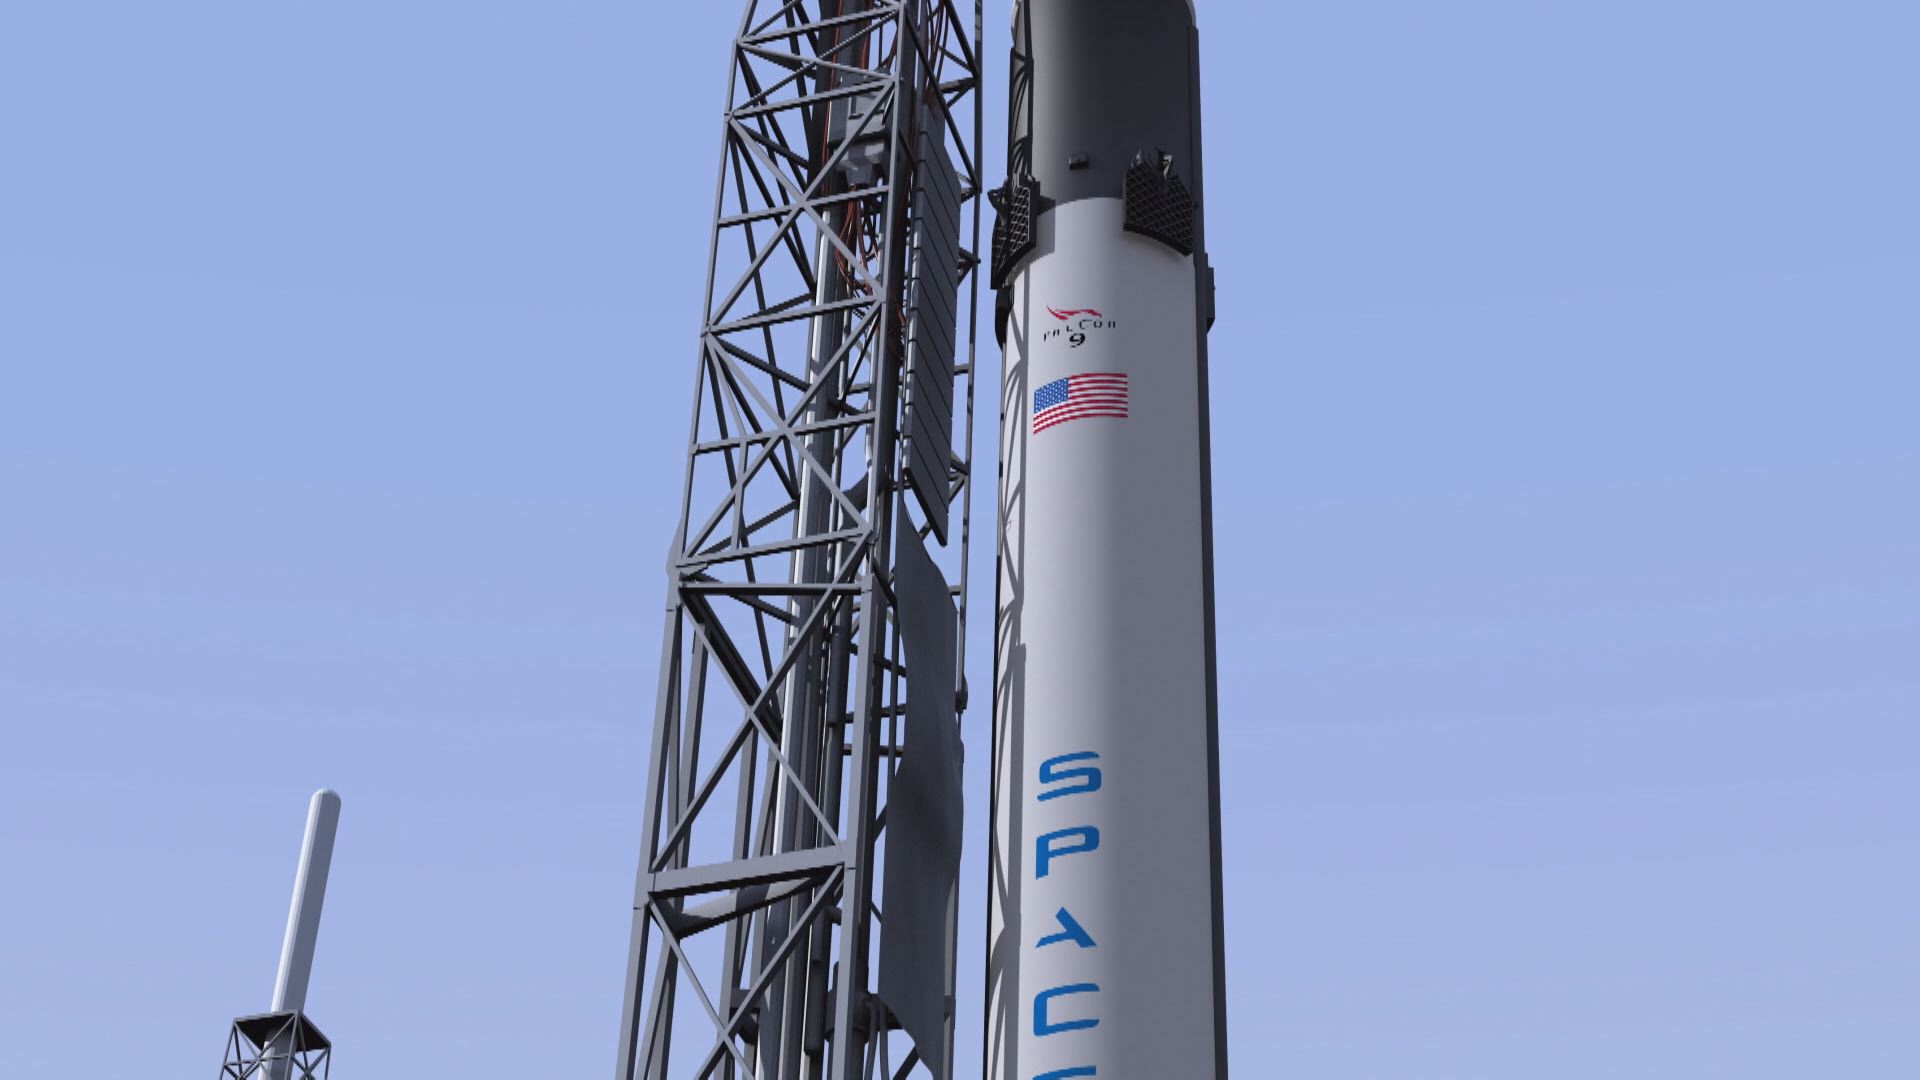 DANURI SET FOR LAUNCH EARLY AUG.